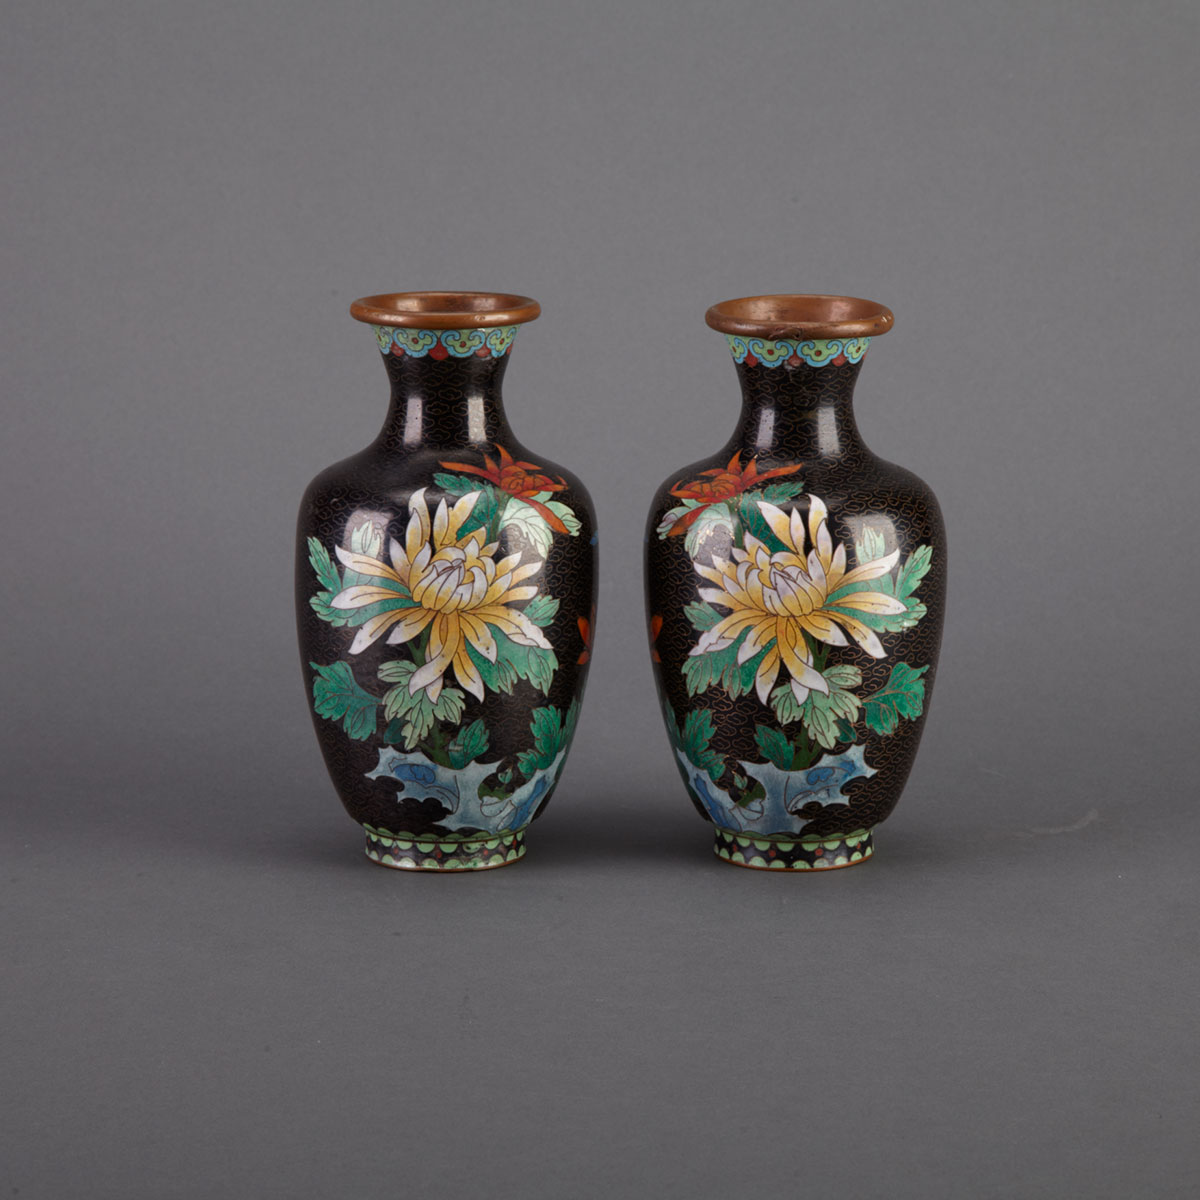 Pair of Chinese Cloisonne Vases early